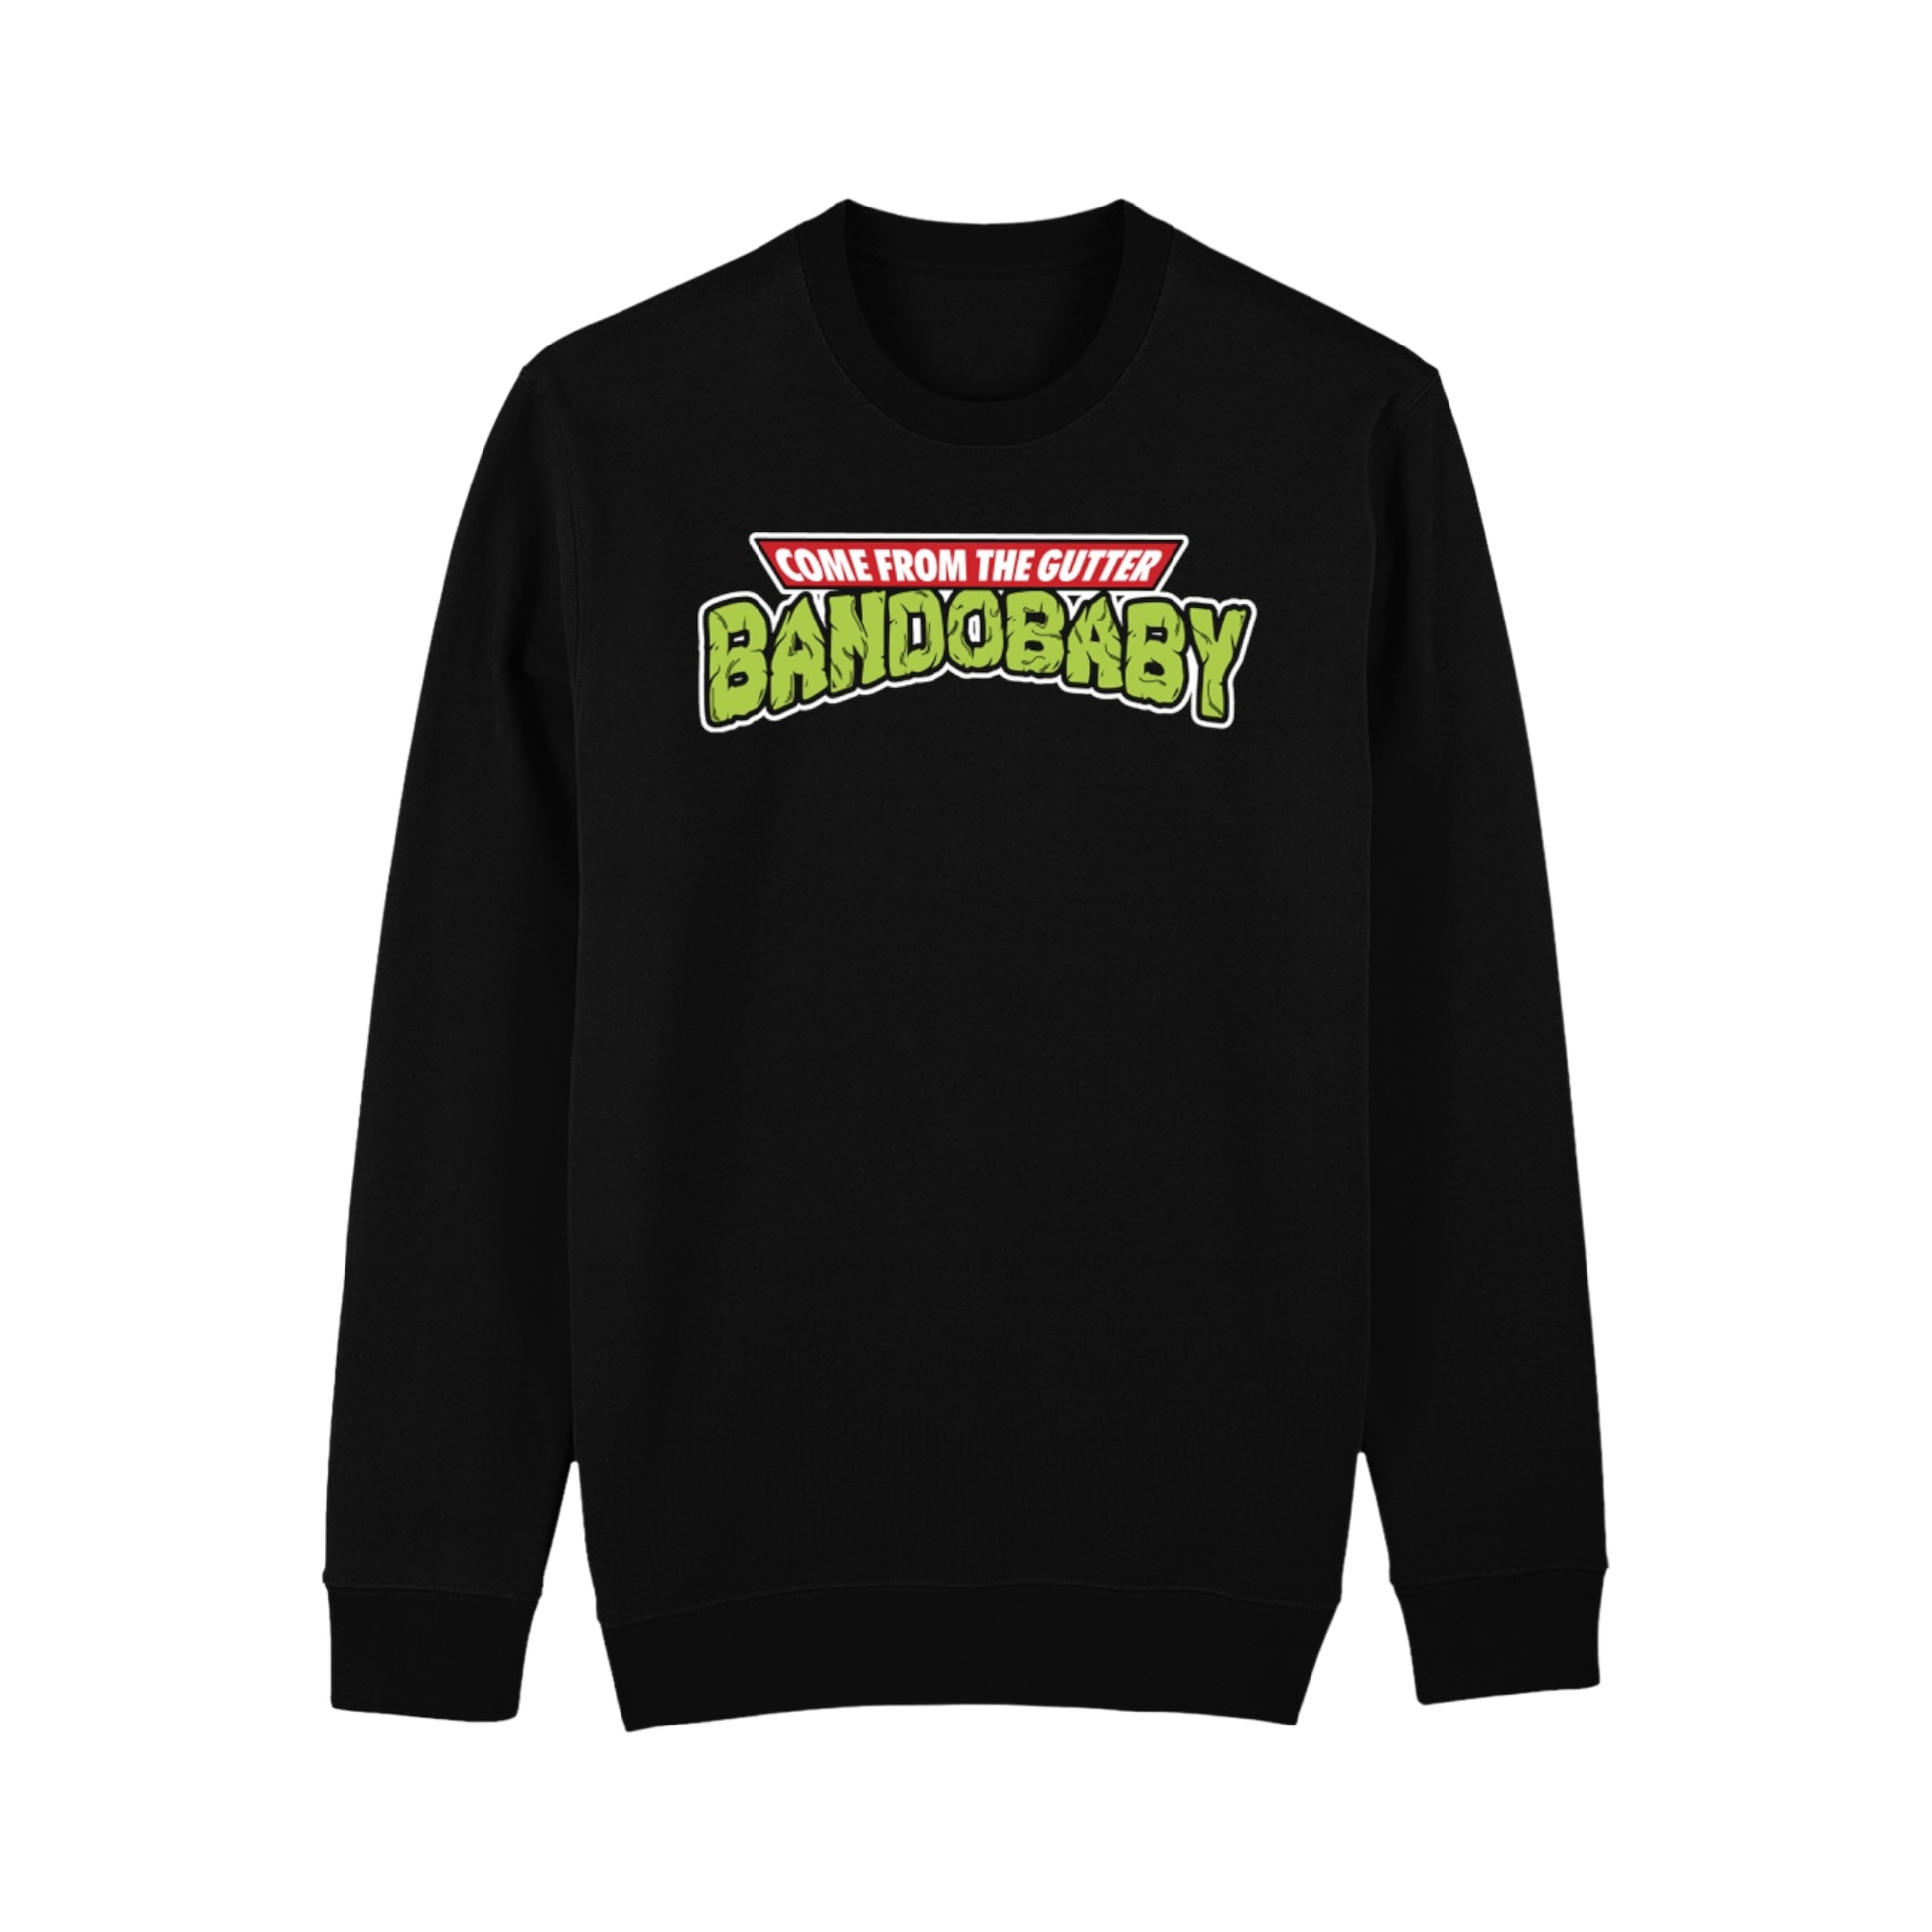 Came From The Gutter Sweatshirt - Bando Baby 